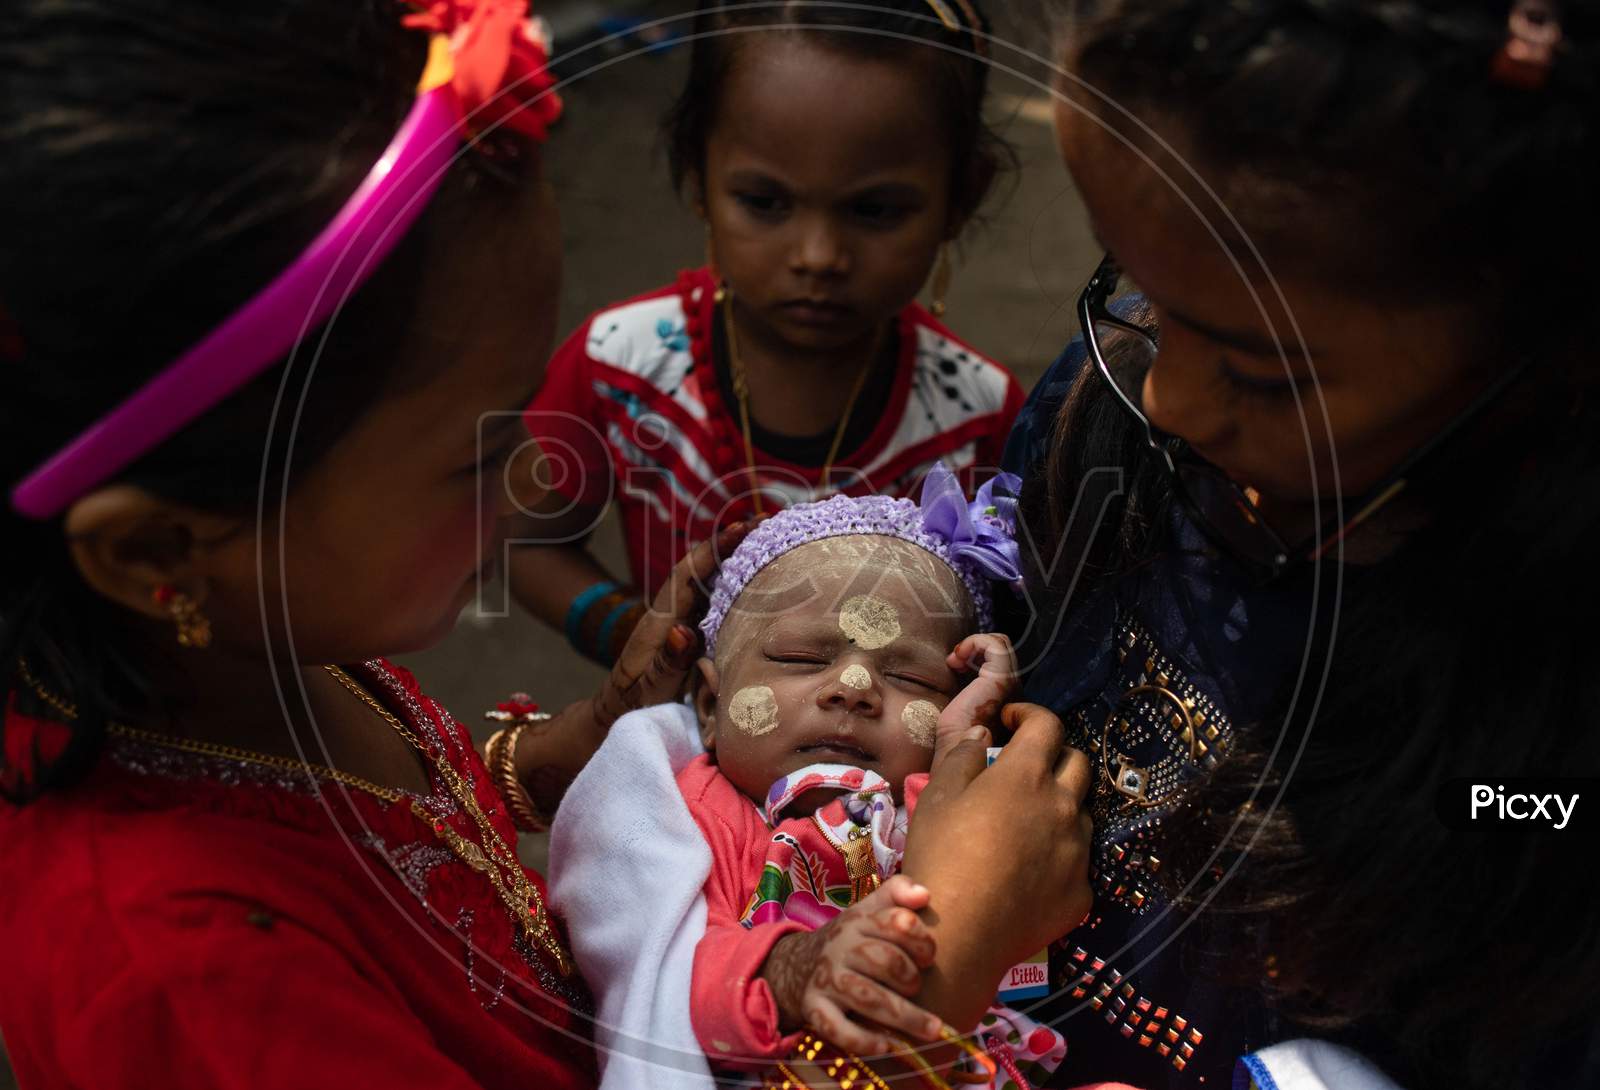 Rohingya refugee girls hold an infant child painted with traditional Myanmar make up during Eid-Al-Adha (Feast of Sacrifice) festival at a camp in the outskirts of New Delhi, India on August 1, 2020.